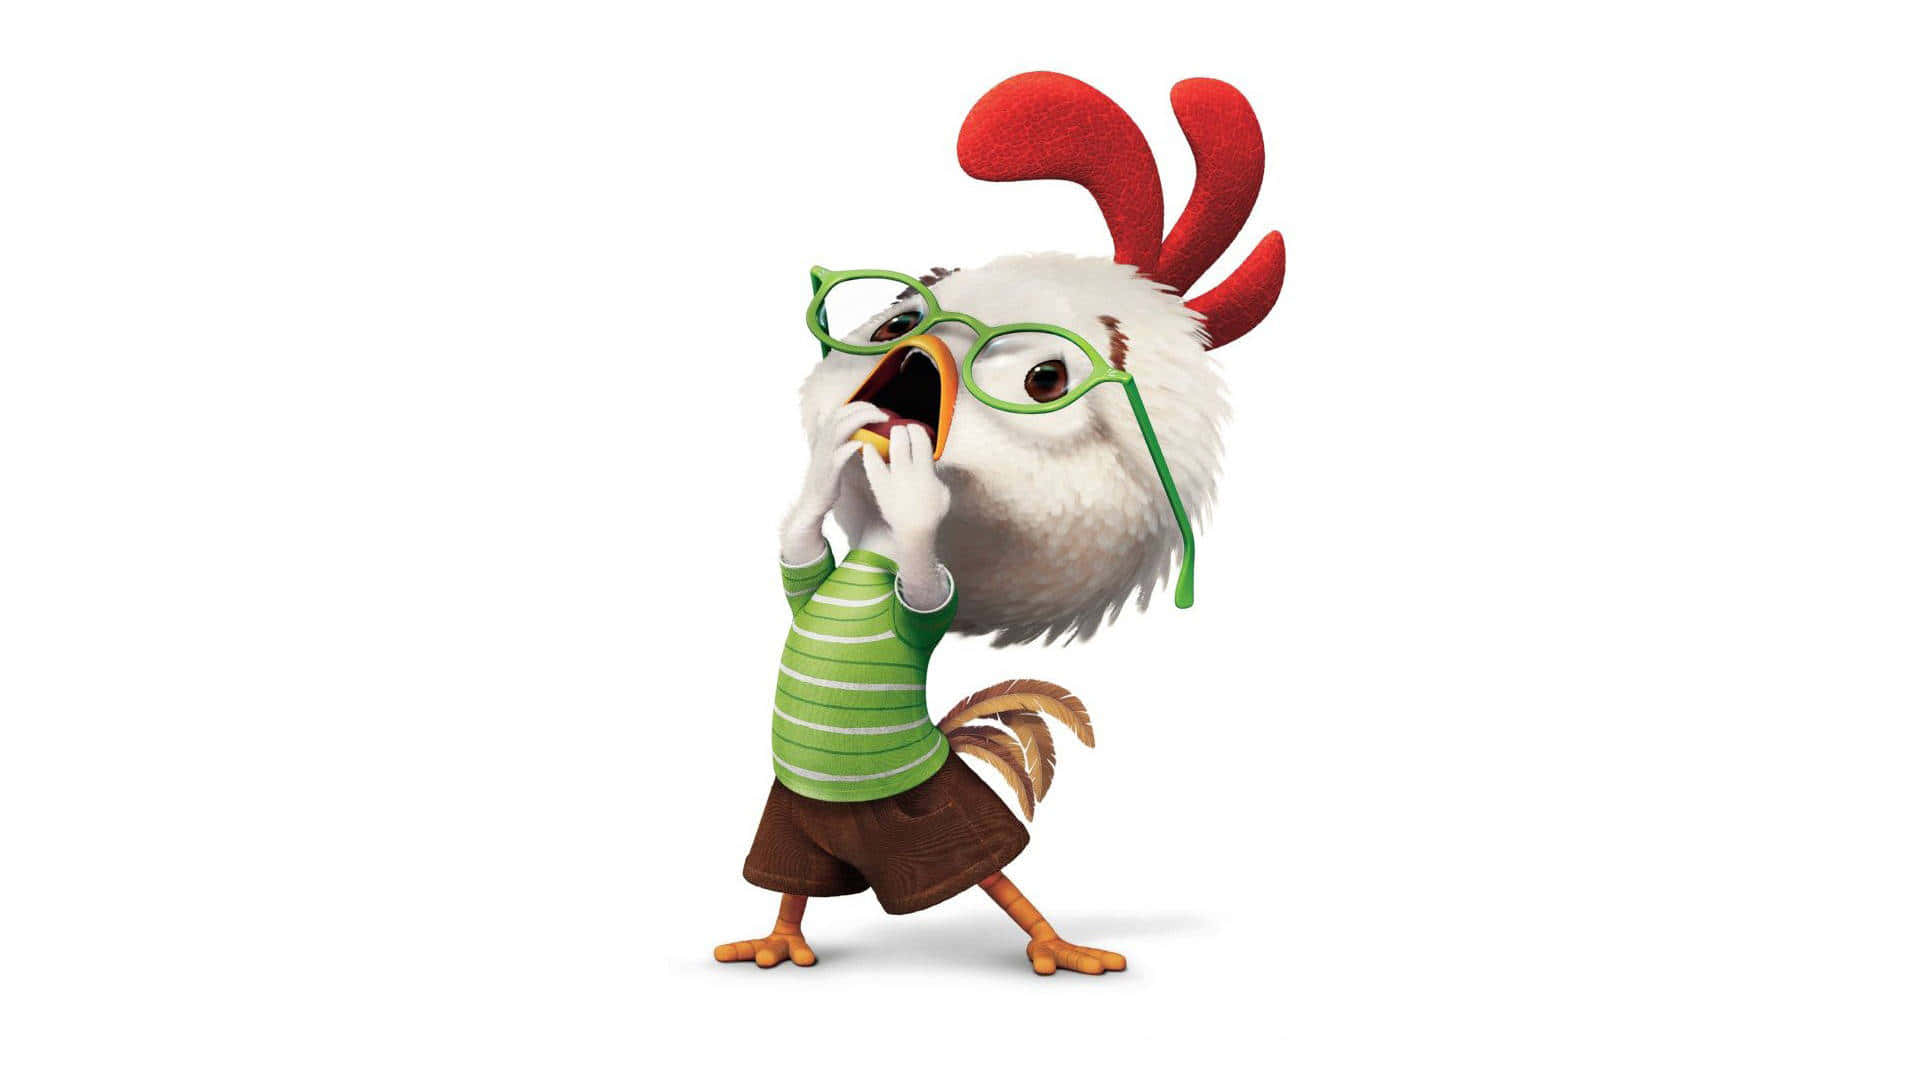 Chicken Little trying to find the sky